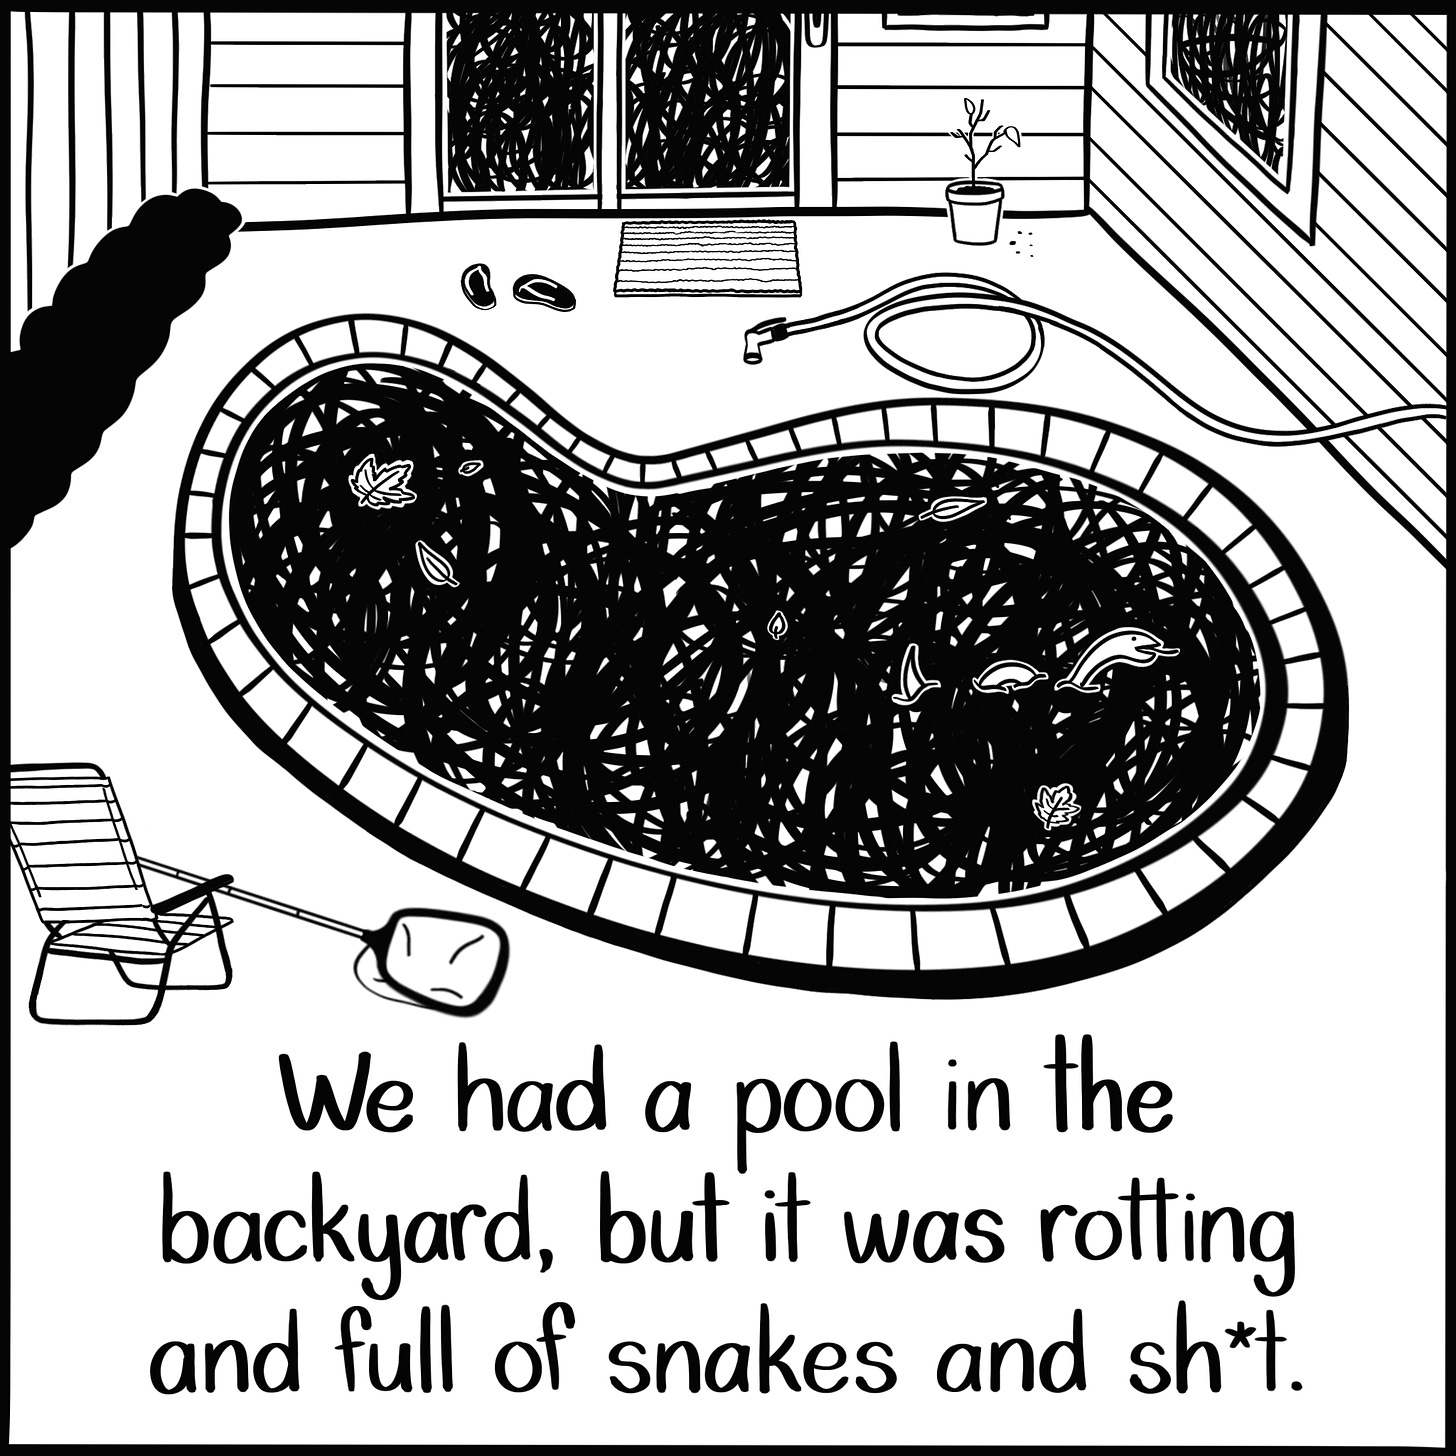 Caption: We had a pool in the backyard, but it was rotting and full of snakes and sh*t. Image: An ovular backyard pool filled with leaves and a snake with scribbles filling in the blank space. Various items such as a beach chair, abandoned flip flops, and a dying plant surround the pool.